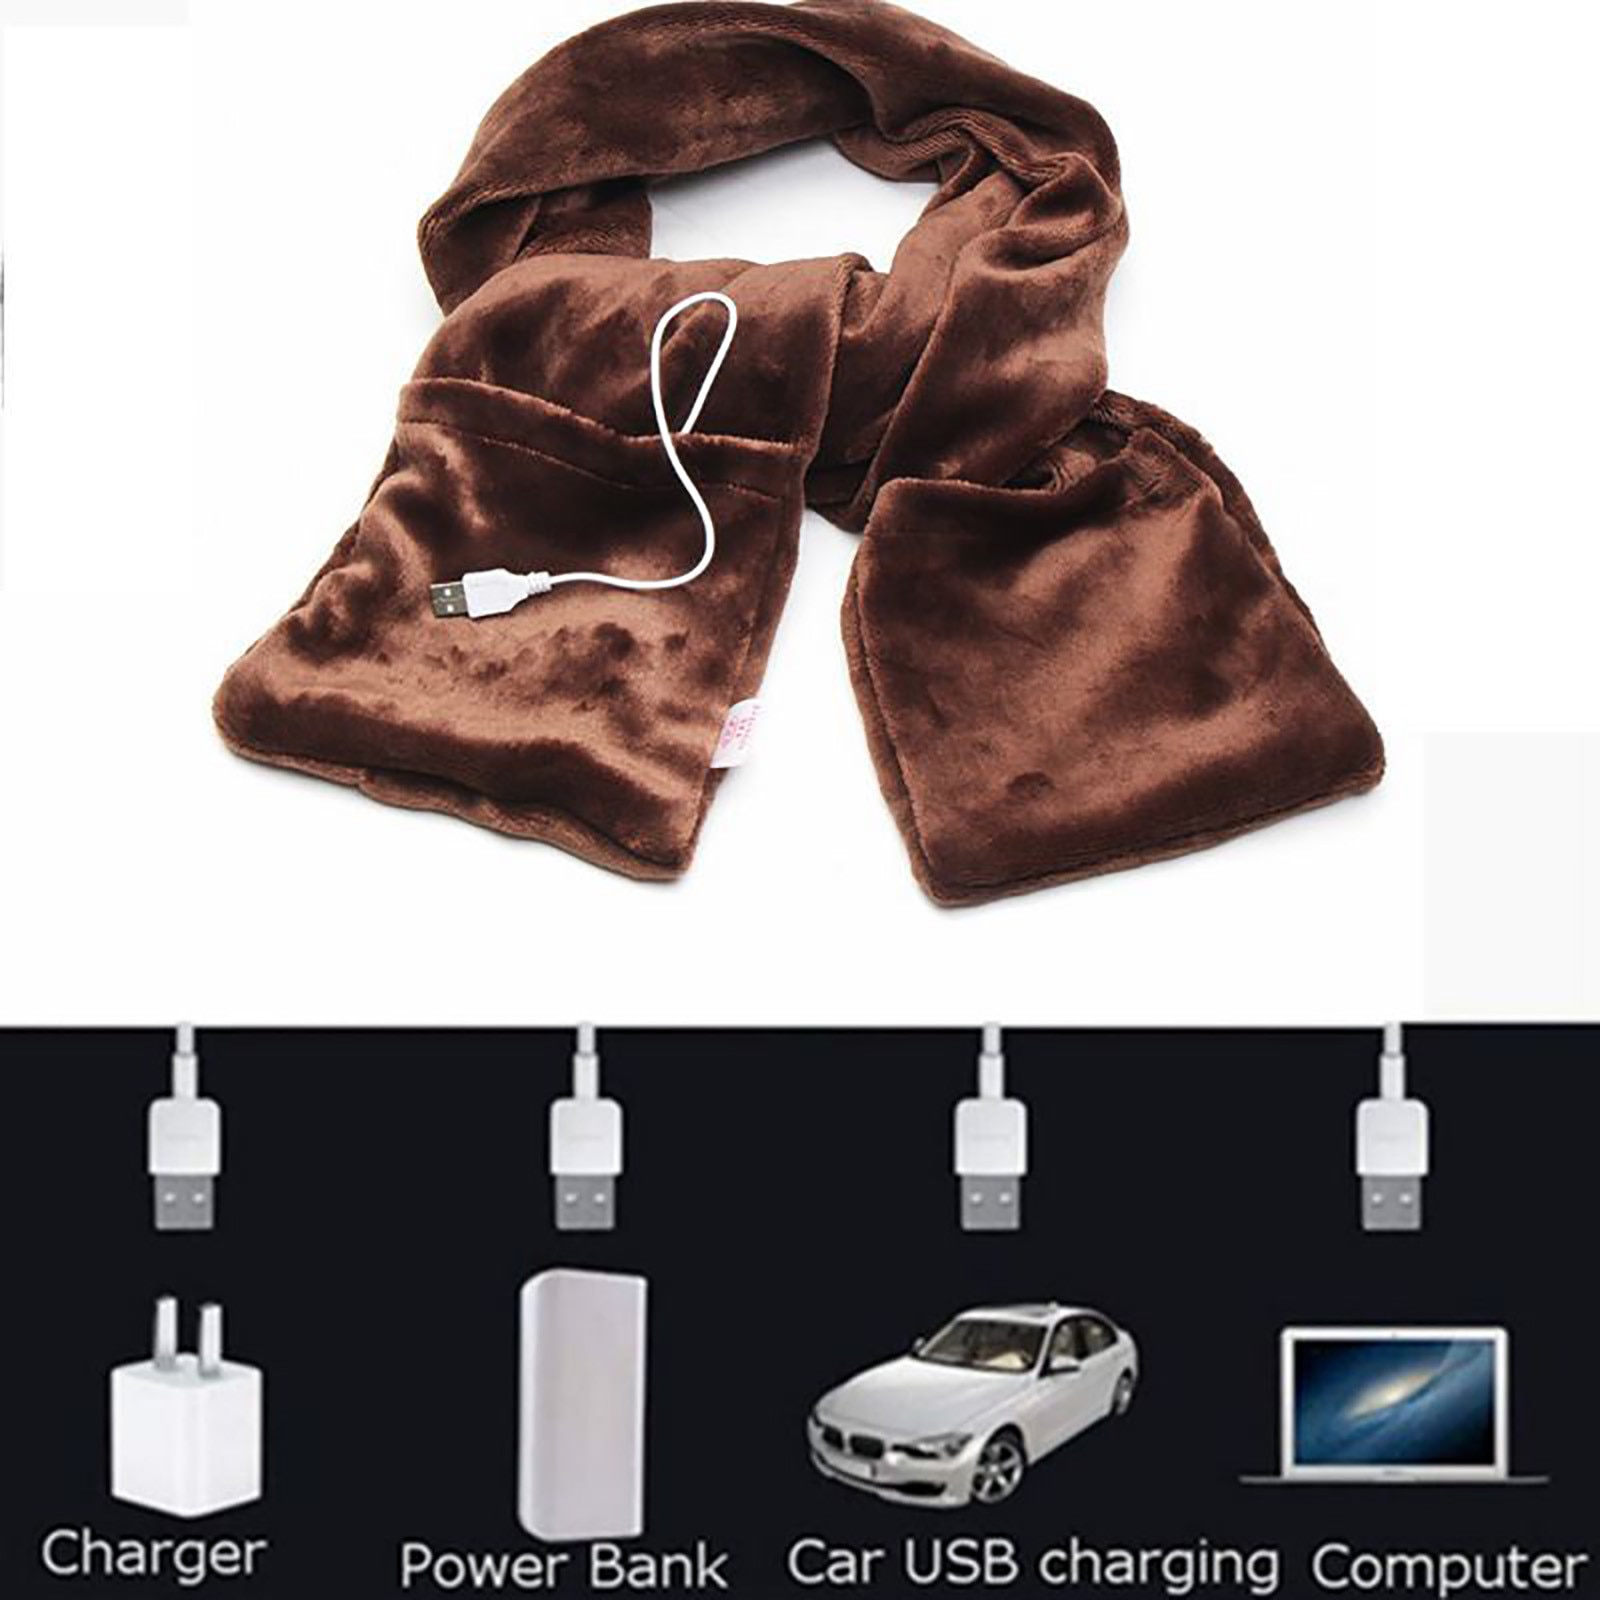 40-USB-chauffage-charpe-adulte-chauffage-ch-le-charpes-froid-hiver-chaud-enveloppes-femmes-solide-doux